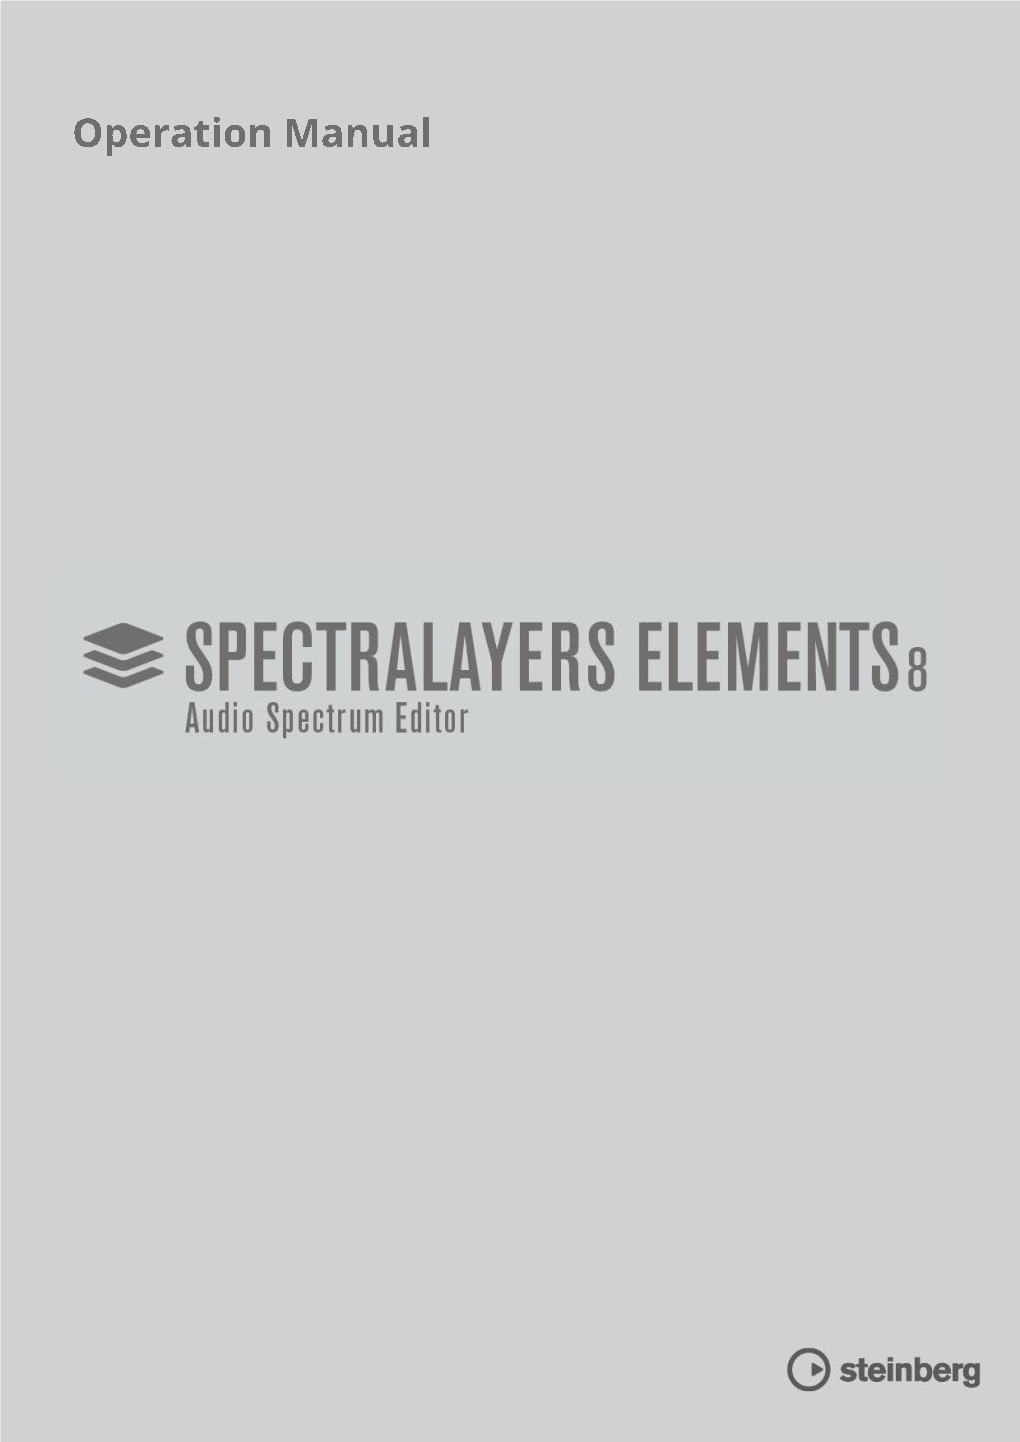 Spectralayers Elements 8 Ope